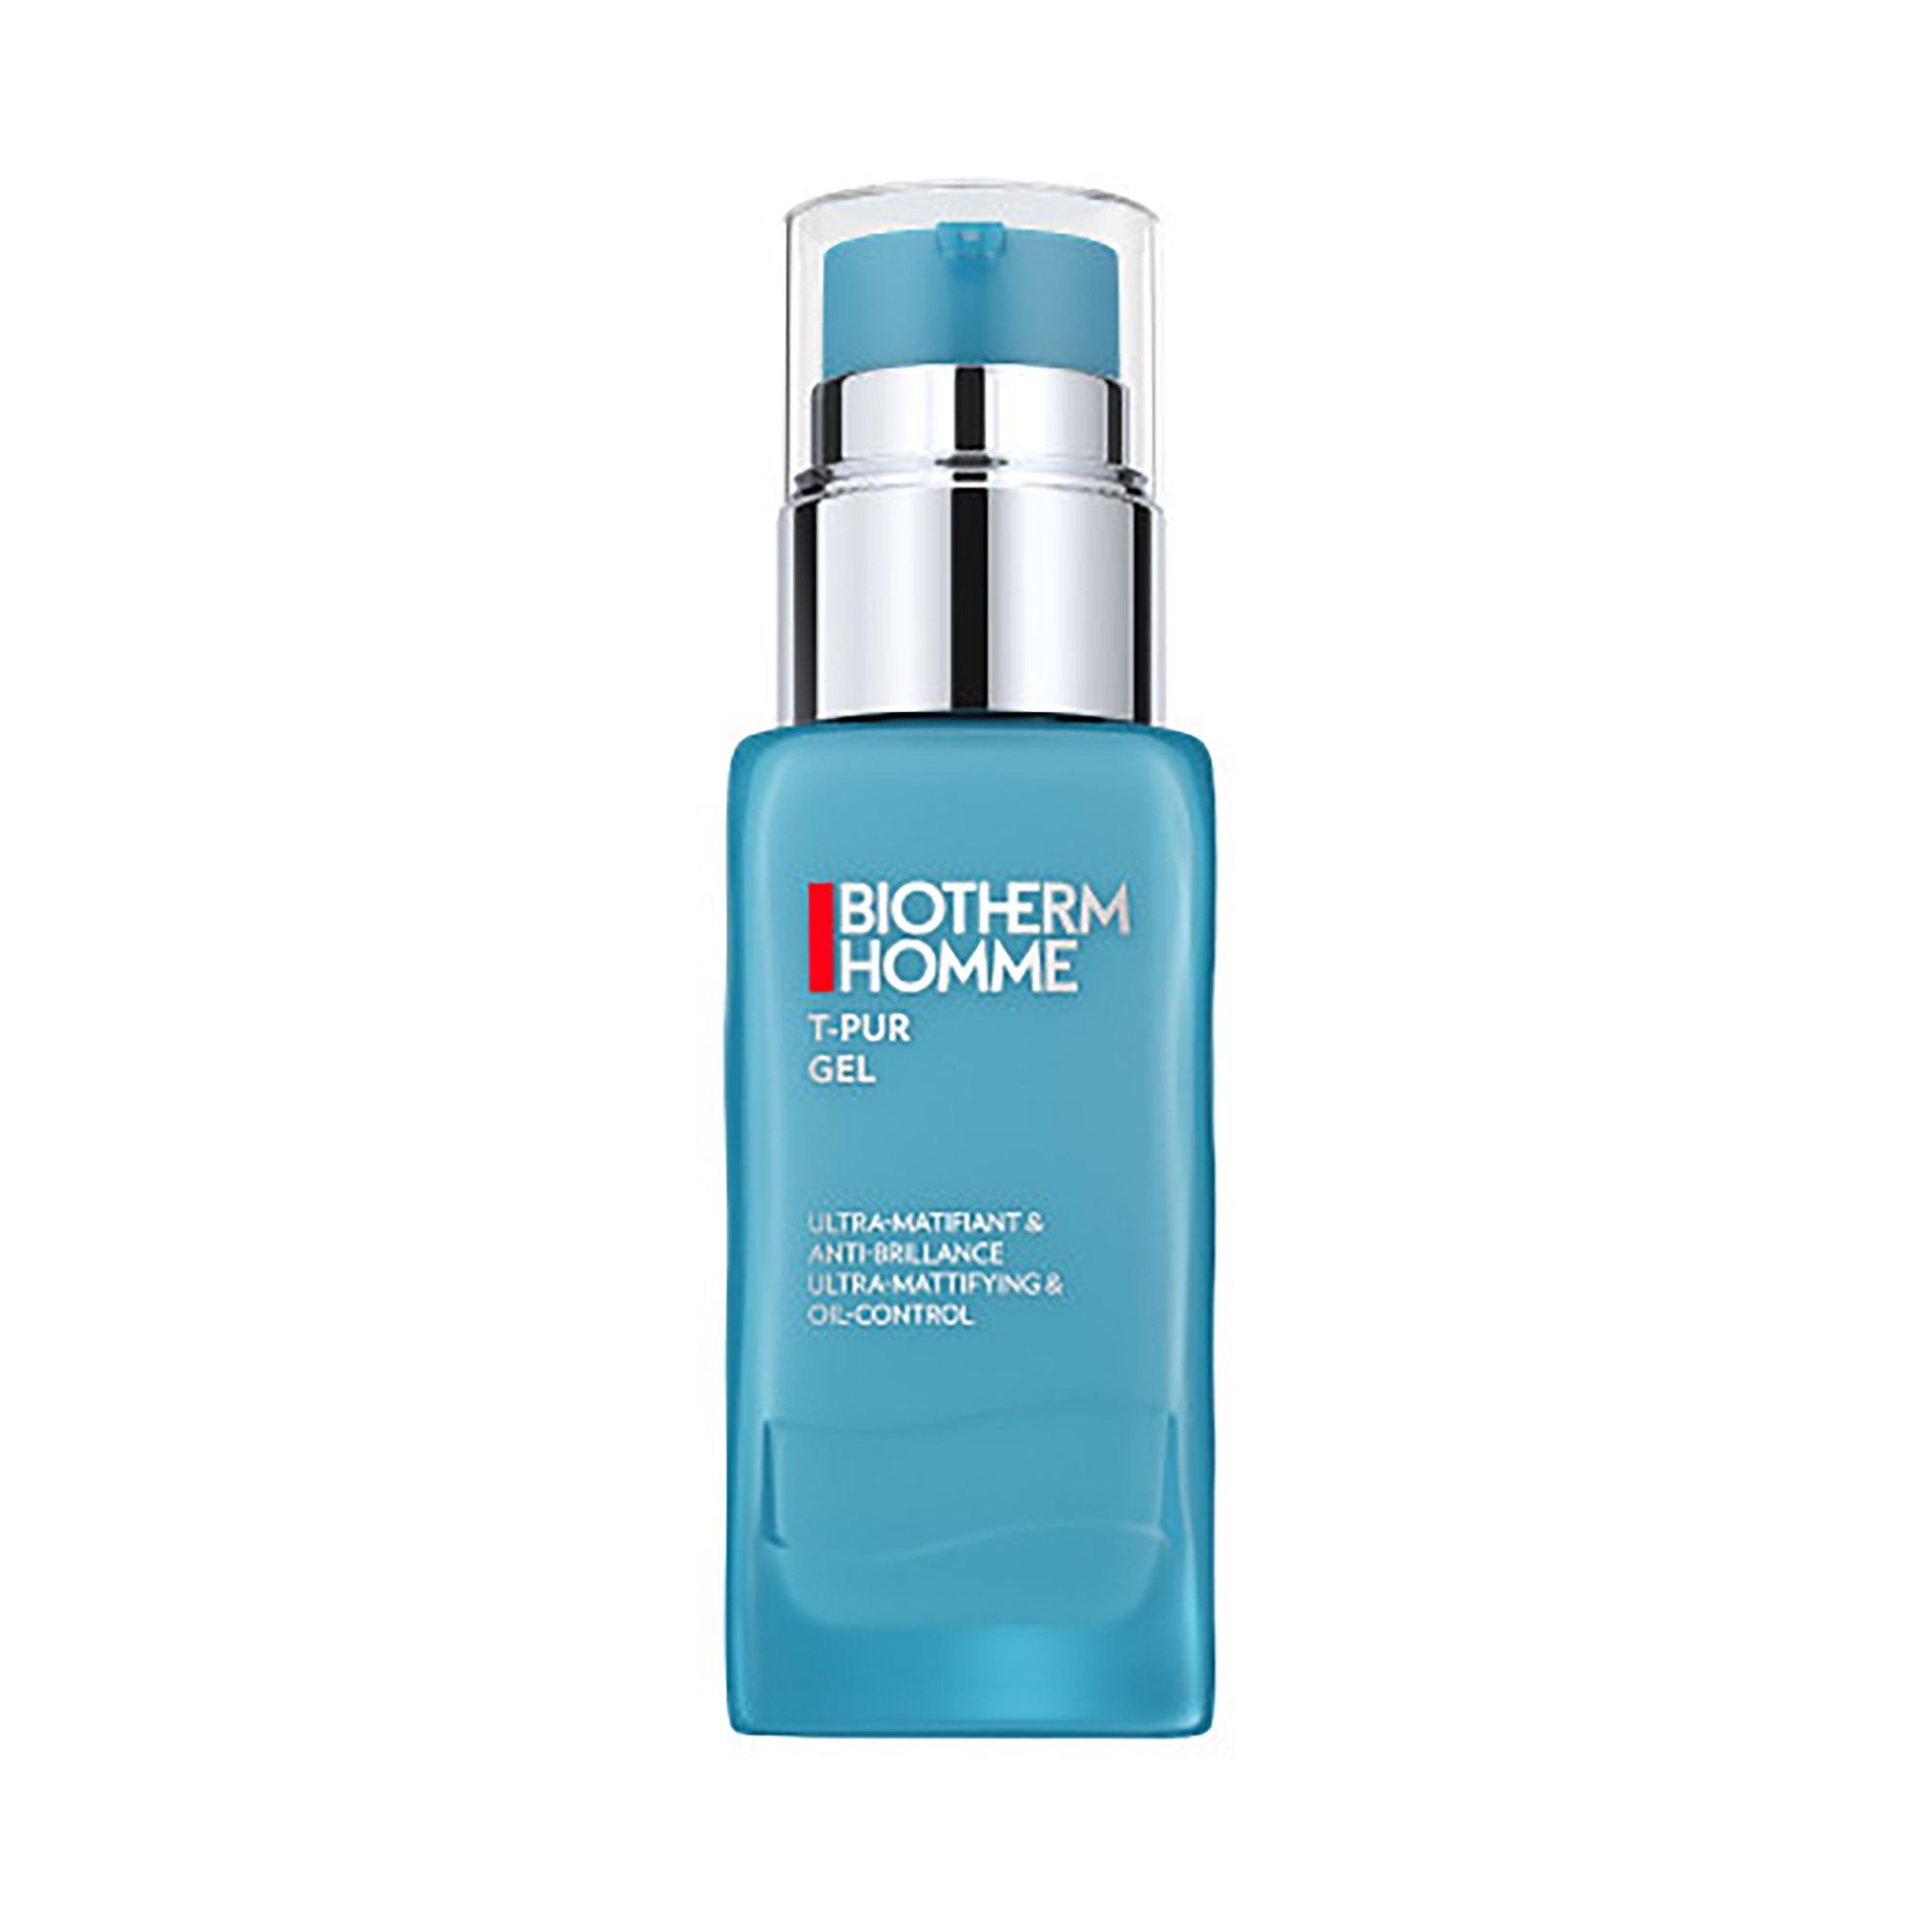 Image of BIOTHERM Homme T-Pur Gel - 50ml